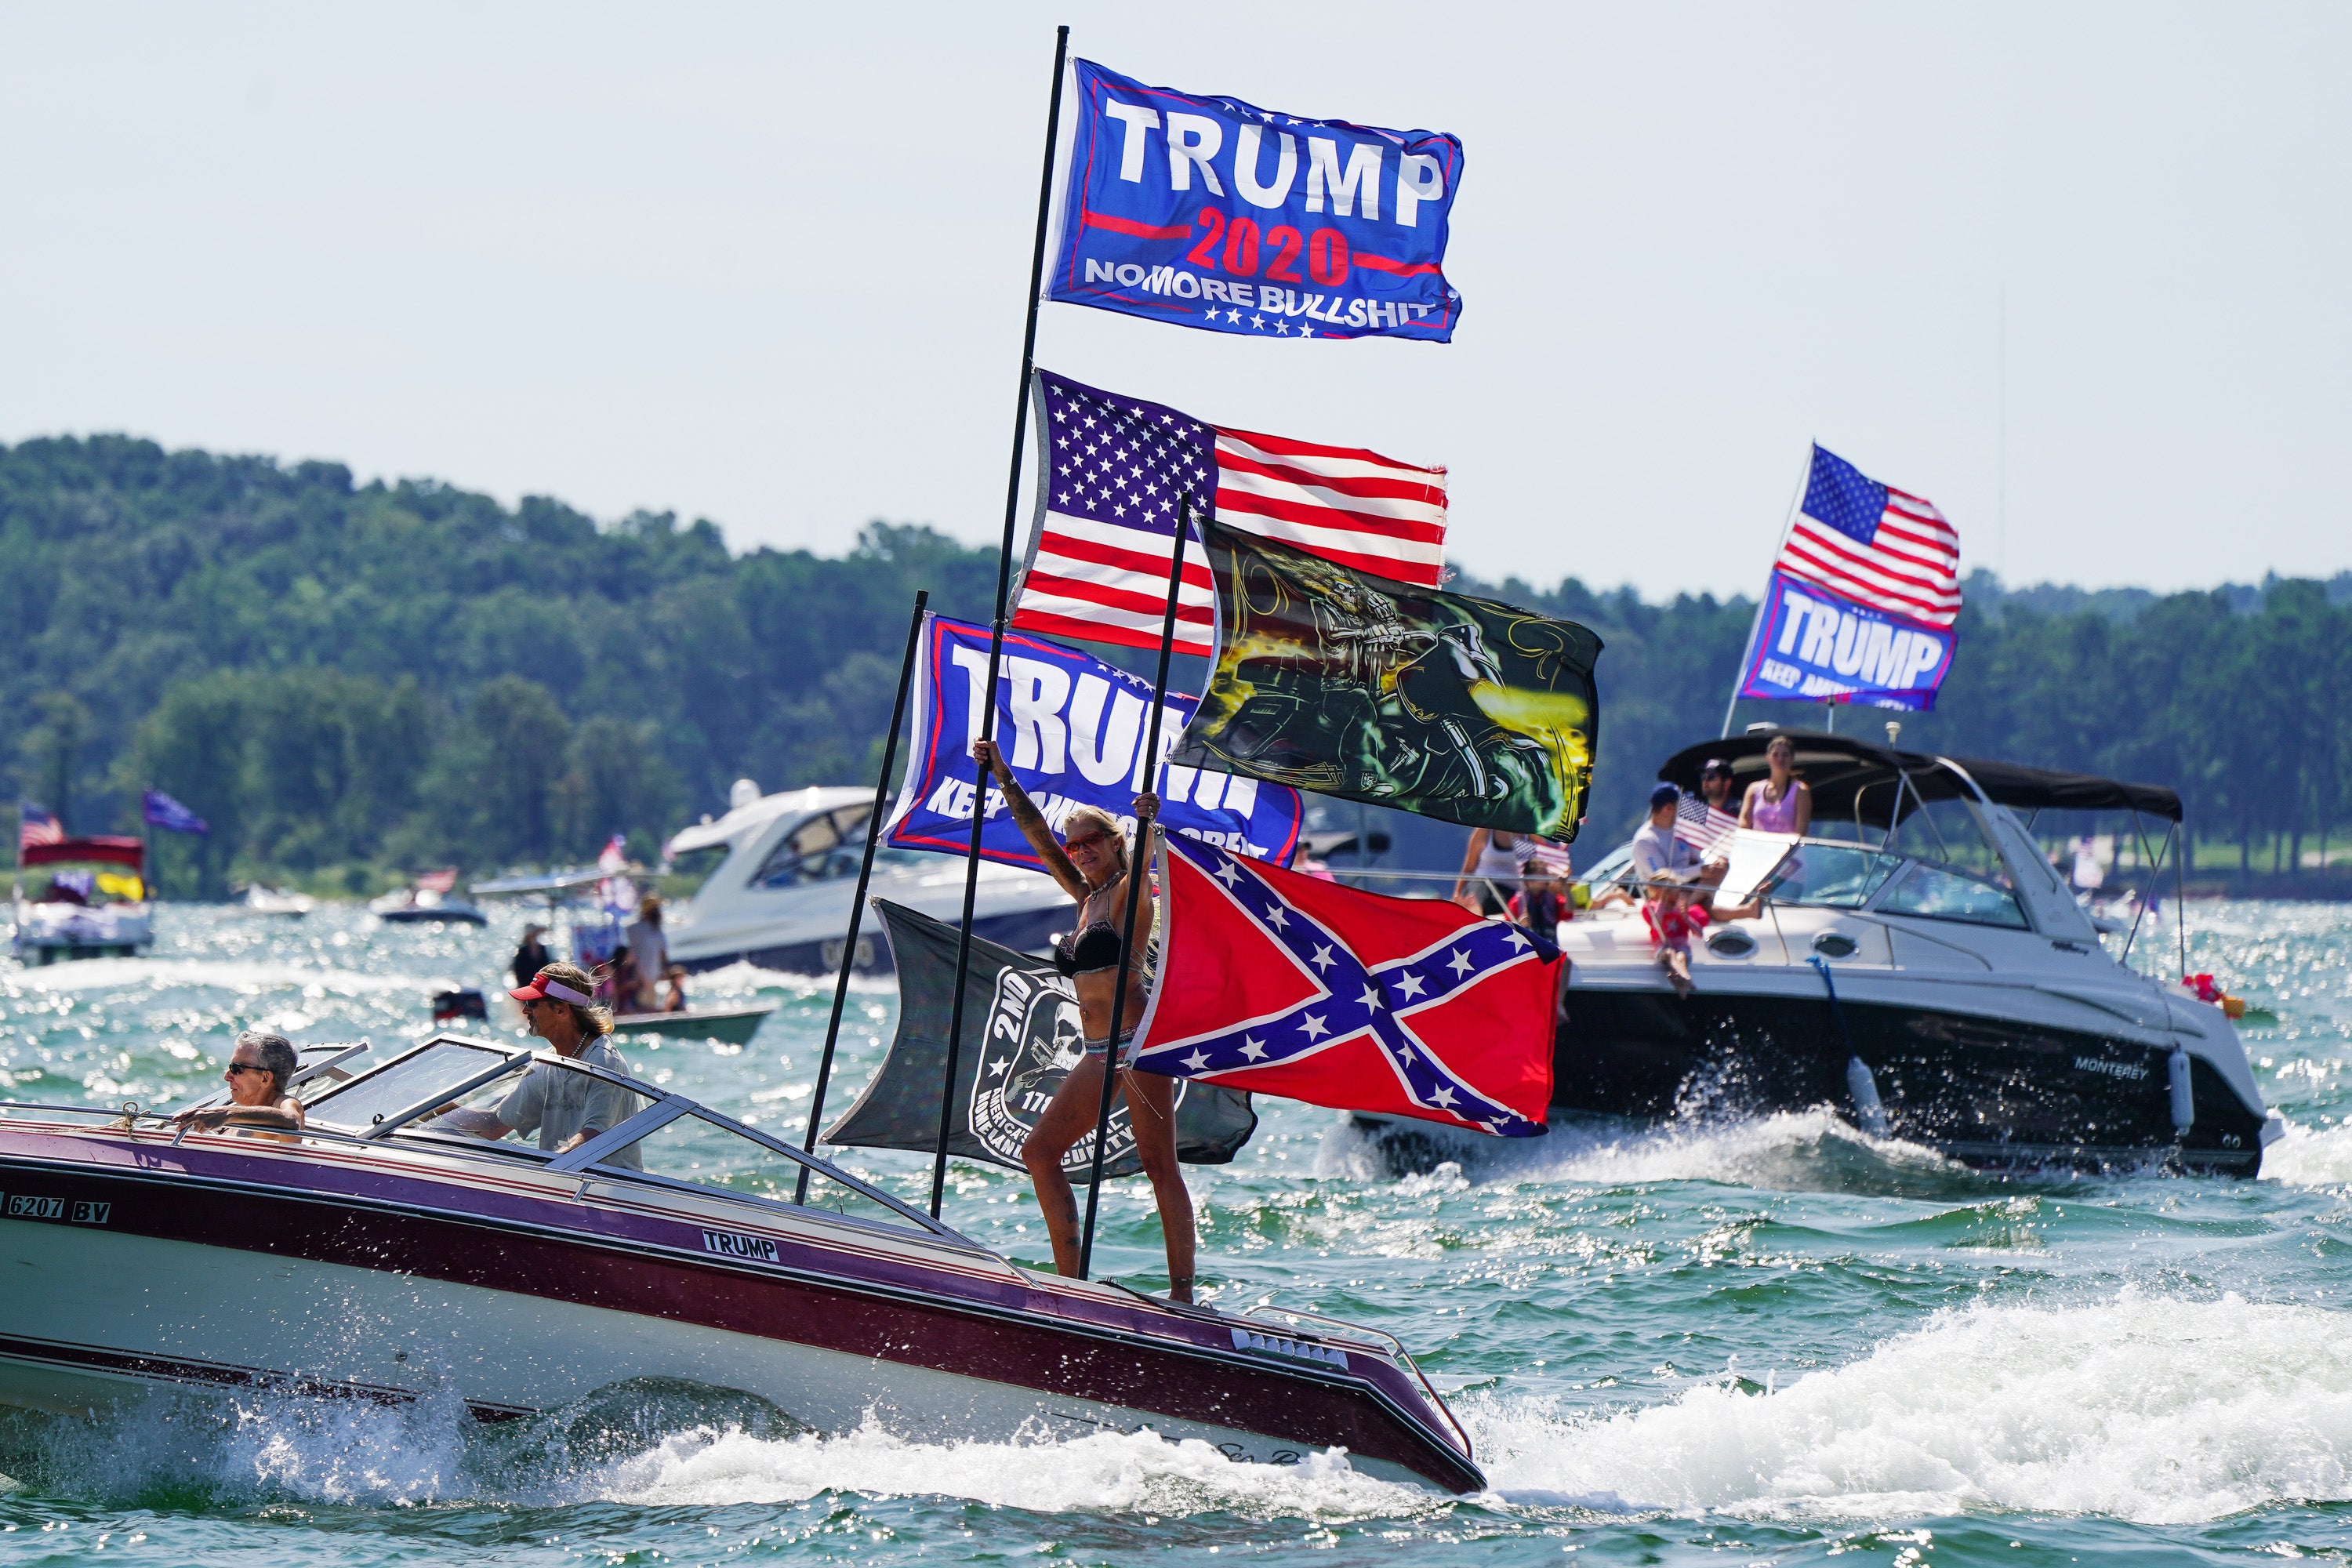 Trump supporters take part in a flotilla in Texas in support of the president